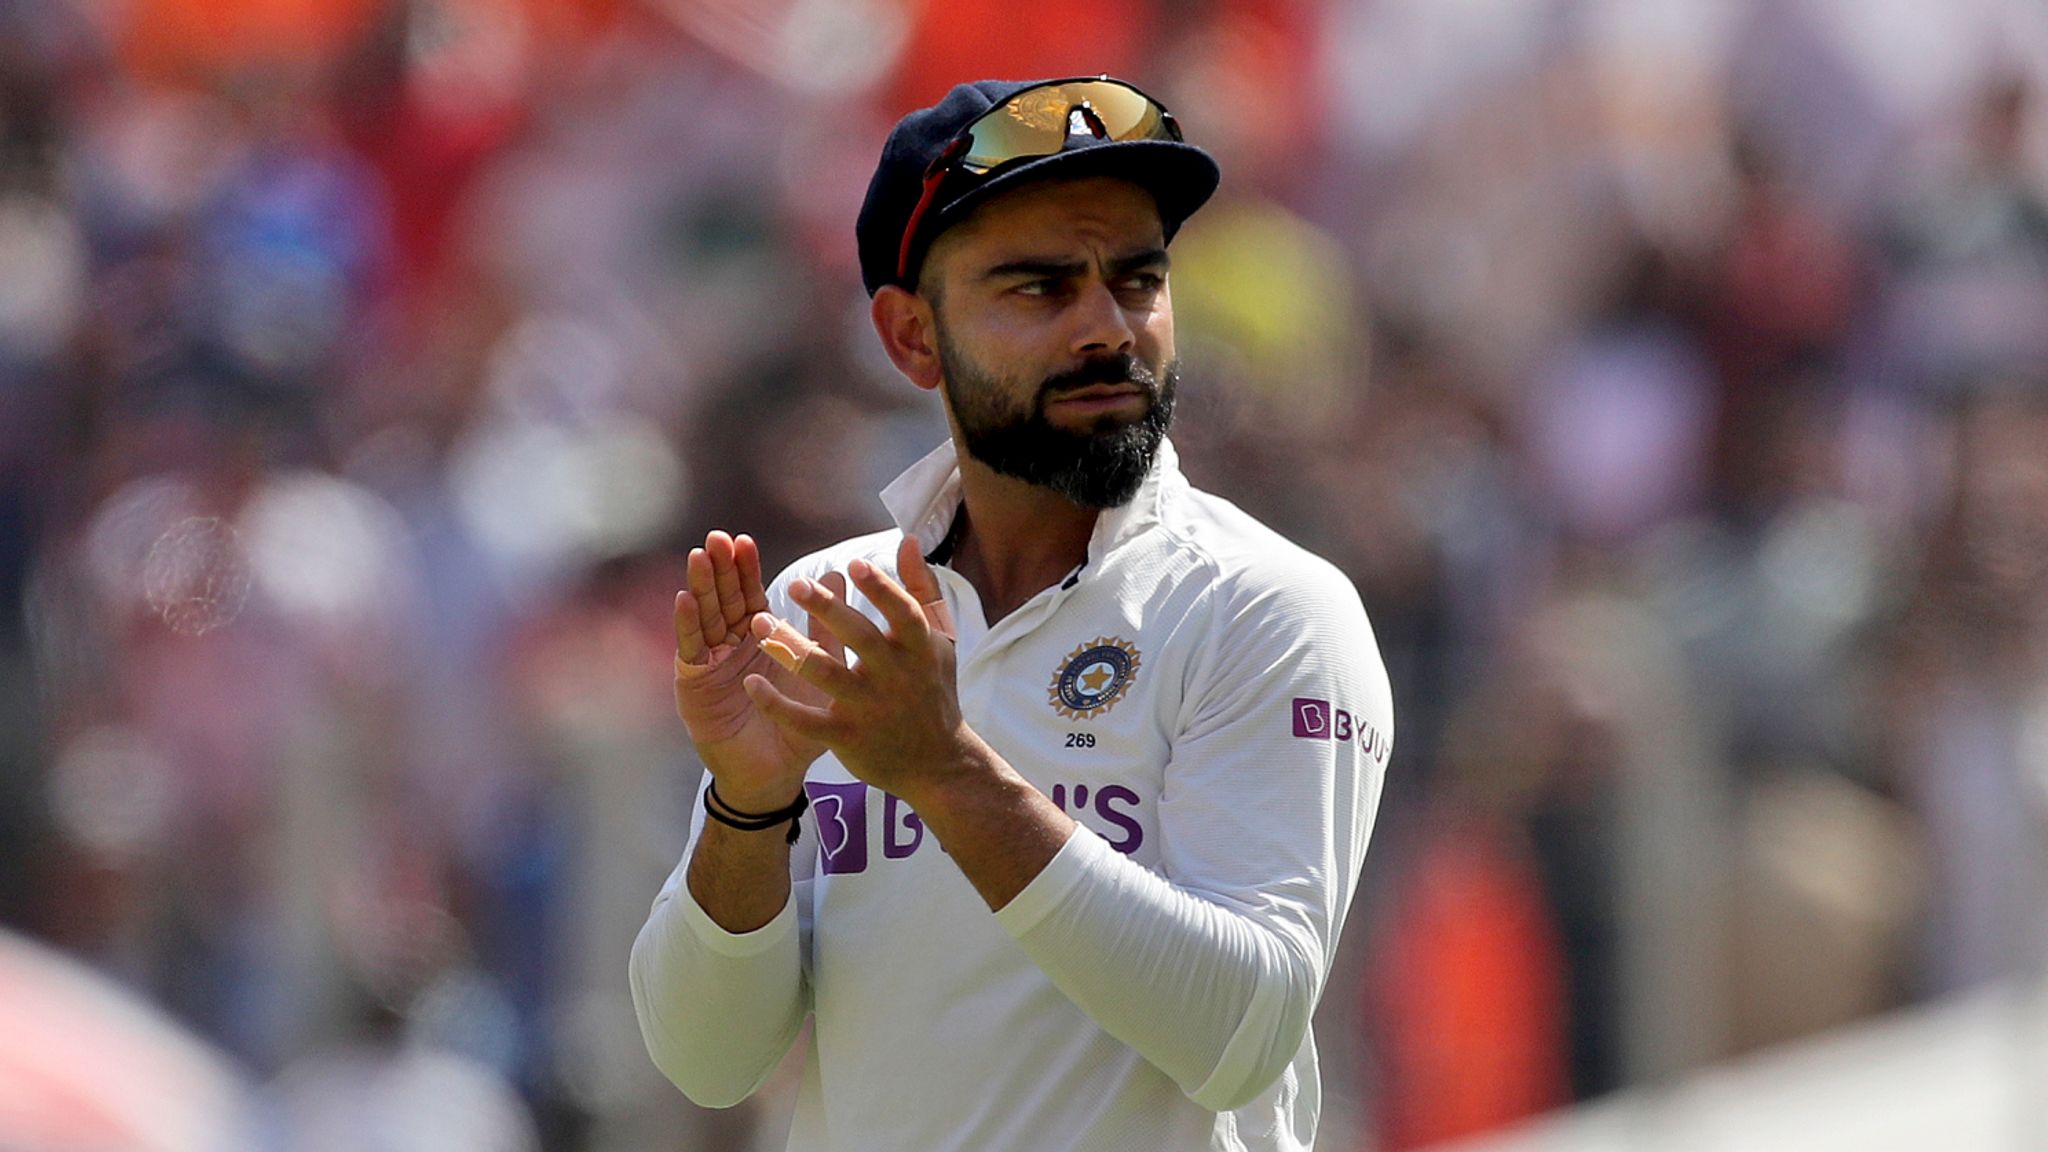 Virat Kohli will play his 100th Test match when Sri Lanka visits India for a 2-Test series | Getty